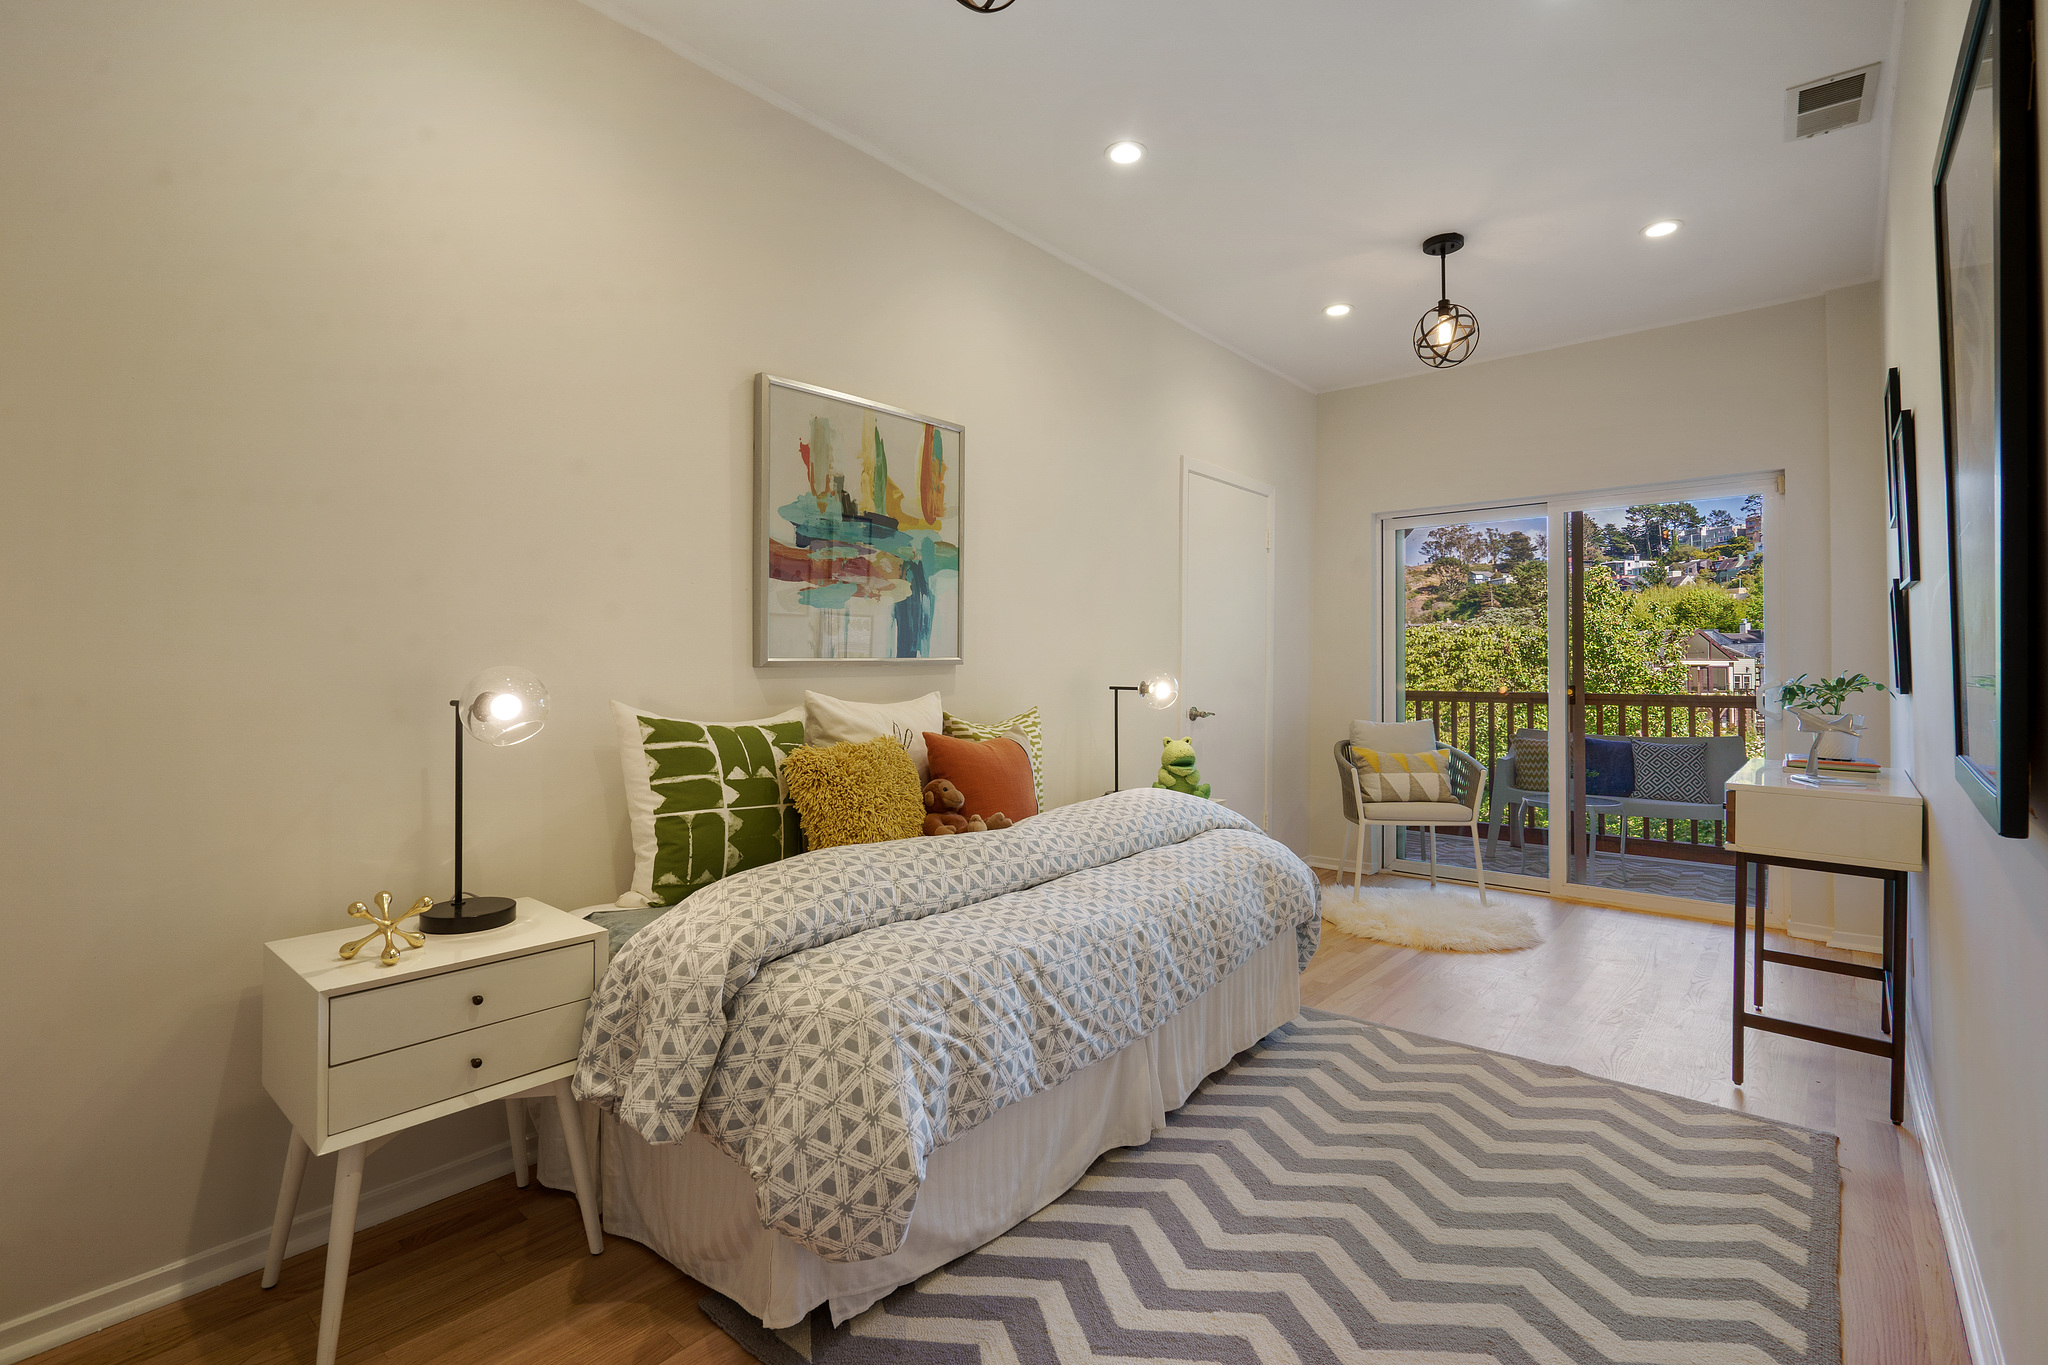 Property Photo: A smaller bedroom with a daybed, wood floors and glass patio doors